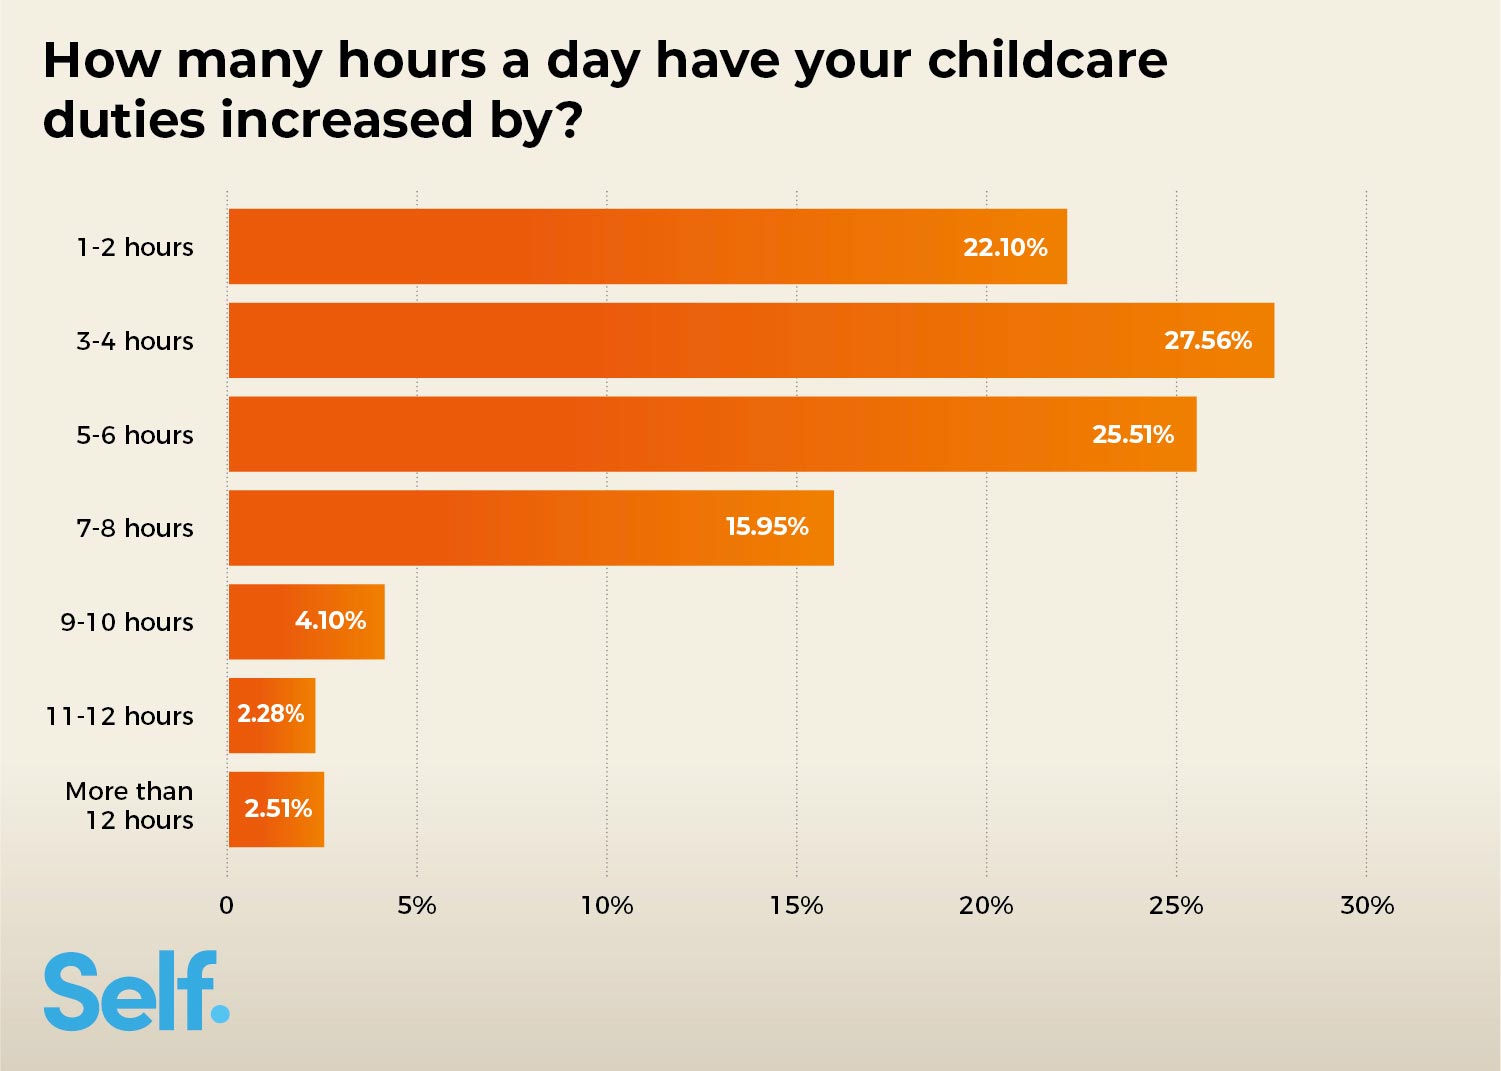 How many hours a day have your childcare duties increased by?